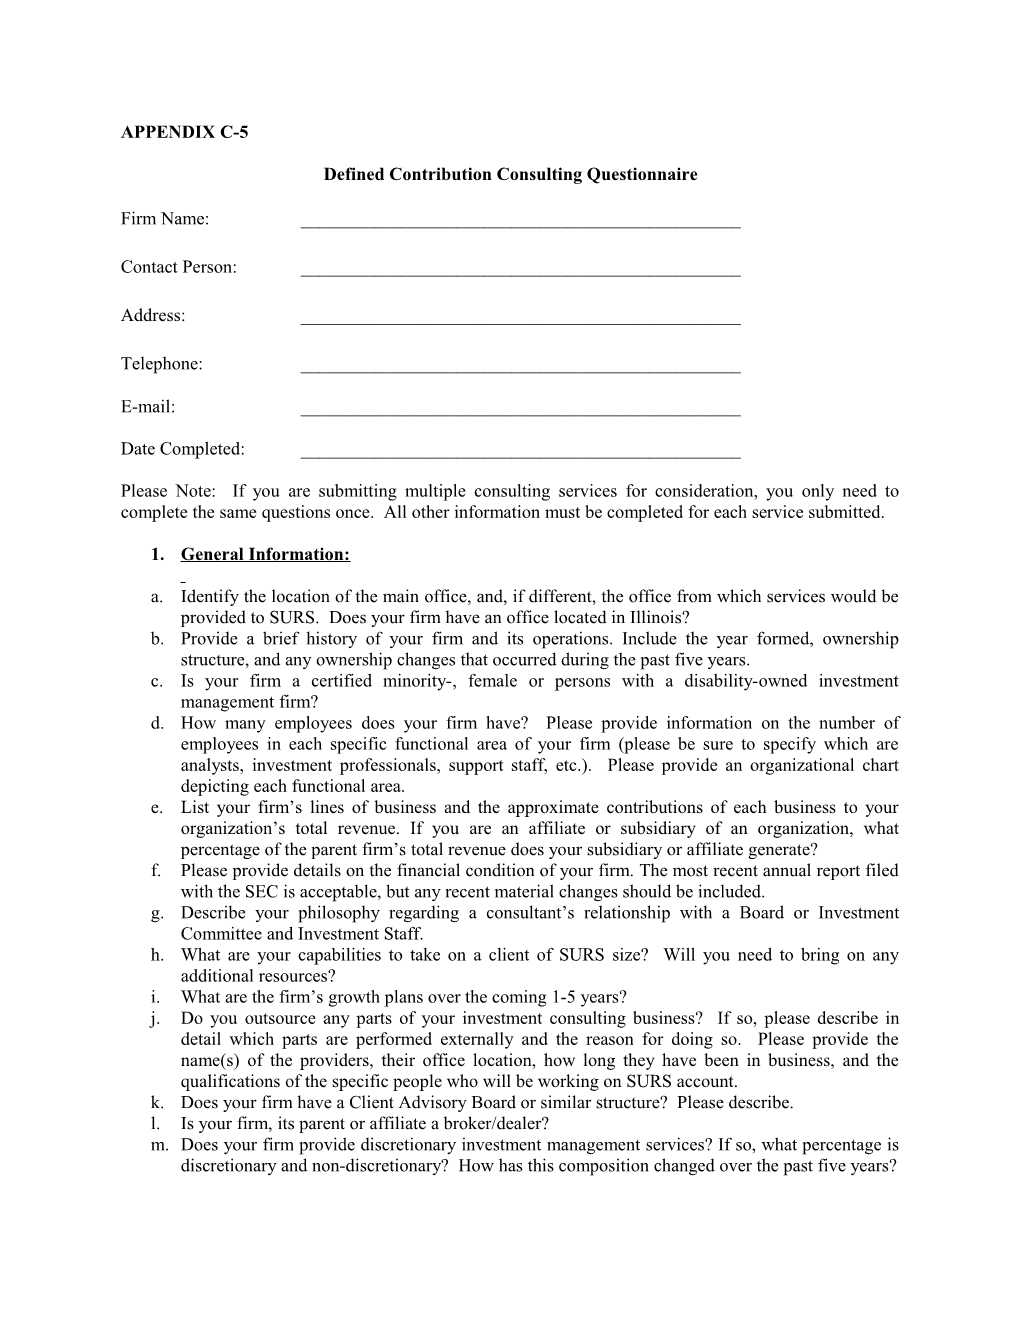 Defined Contribution Consulting Questionnaire